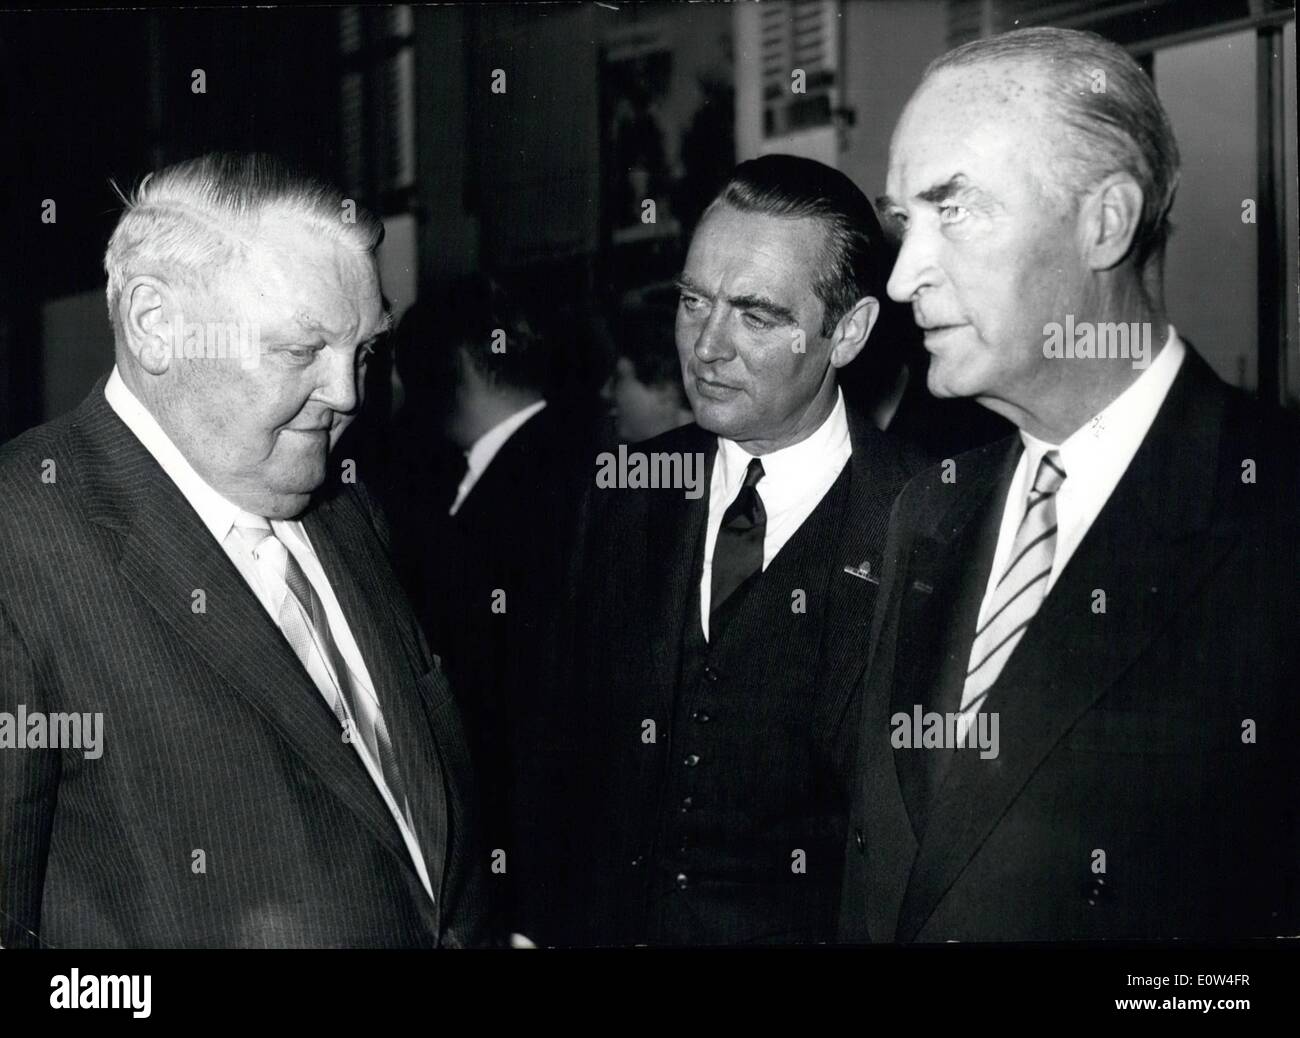 Apr. 04, 1961 - First Meeting of Krupp-representatives in foreign countries On April 25th the first meeting of the Krupp-representatives in foreign countries was opened by Alfried Krupp von Bohlen und Halback in Essen (ALFRIED KRUPP VON BOHLEN AND HALBACH). Abdul 24 representatives in 54 countries were present at this meeting, at which Minister of Economics Ludwing Erhard held a speech. OPS: (left to right) Minister of Economics Ludwig Erhard, authorized Krupp-agent Berthold Beitz (BERTHOLD BEITZ) and Alfried Krupp von Bohlen und Halbach Stock Photo